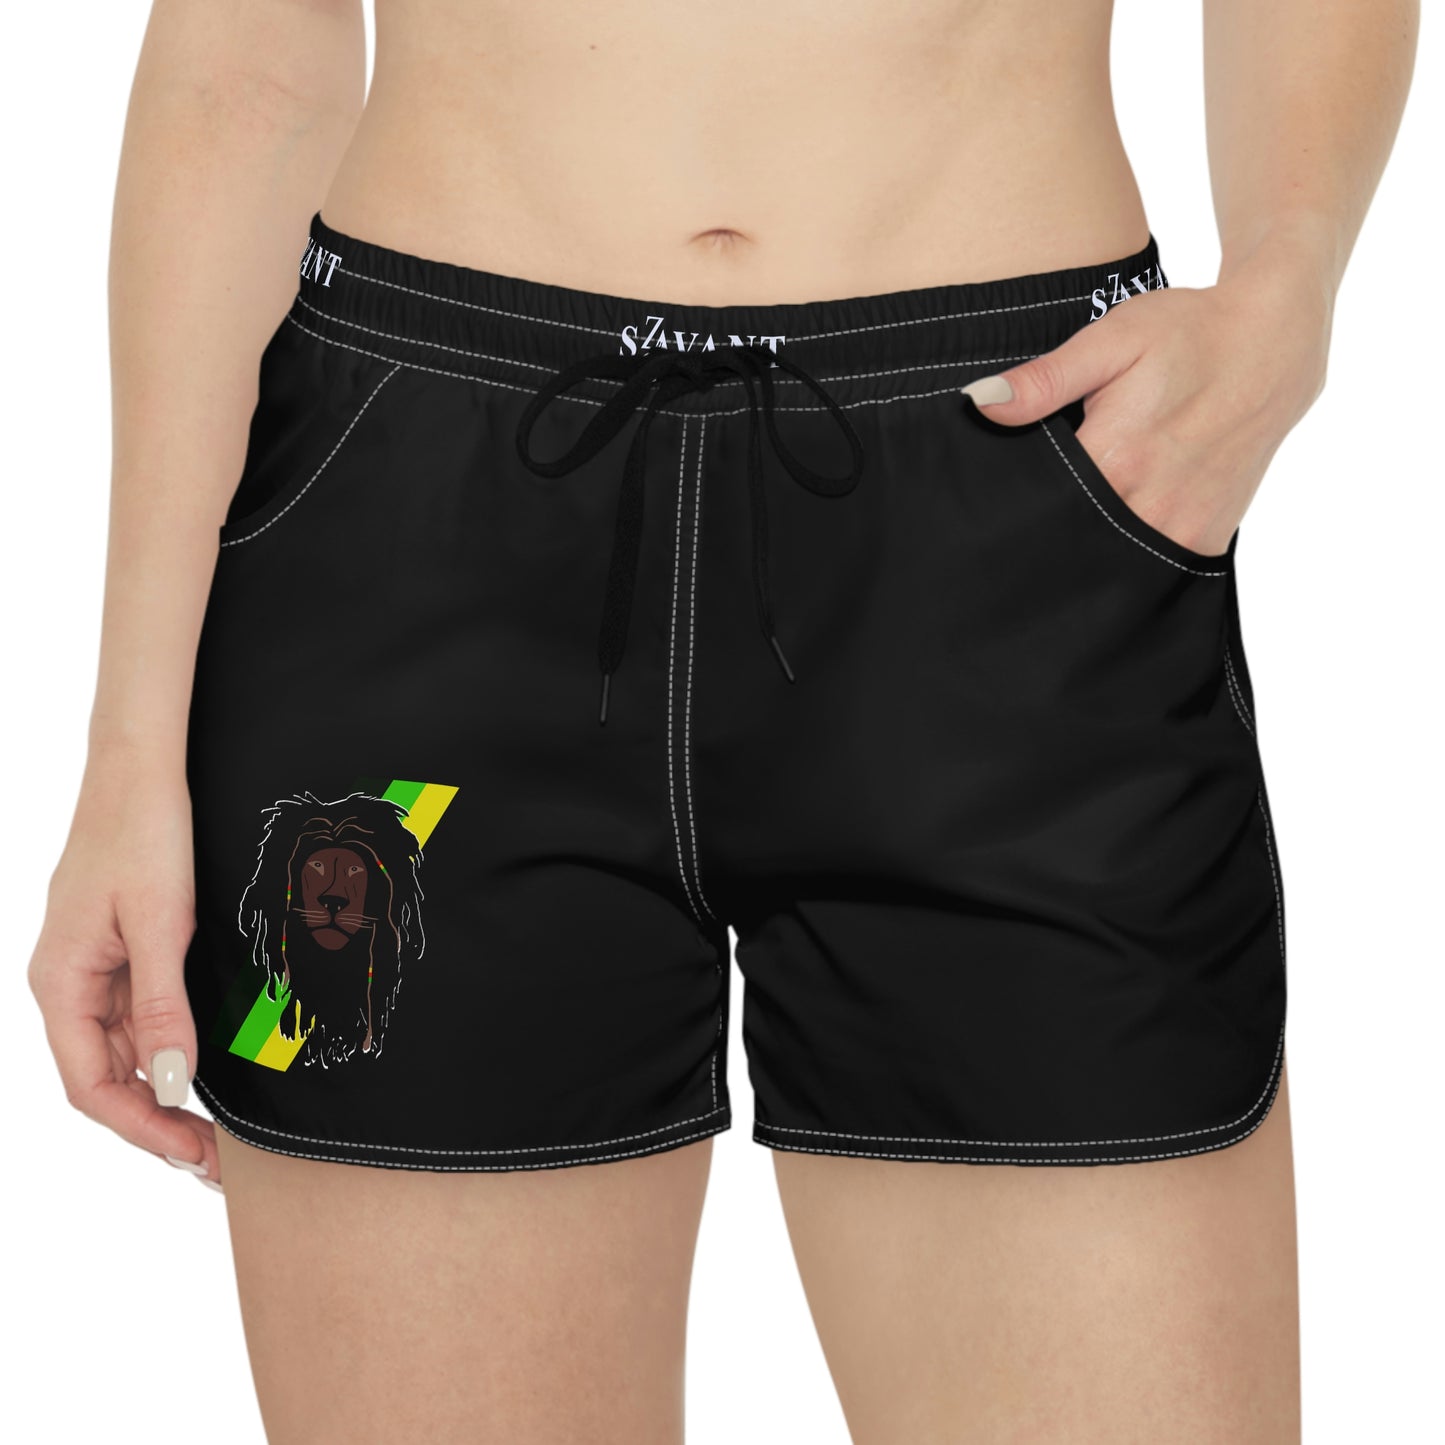 Women's Casual Drawstring Shorts - Black (With JA Colors)